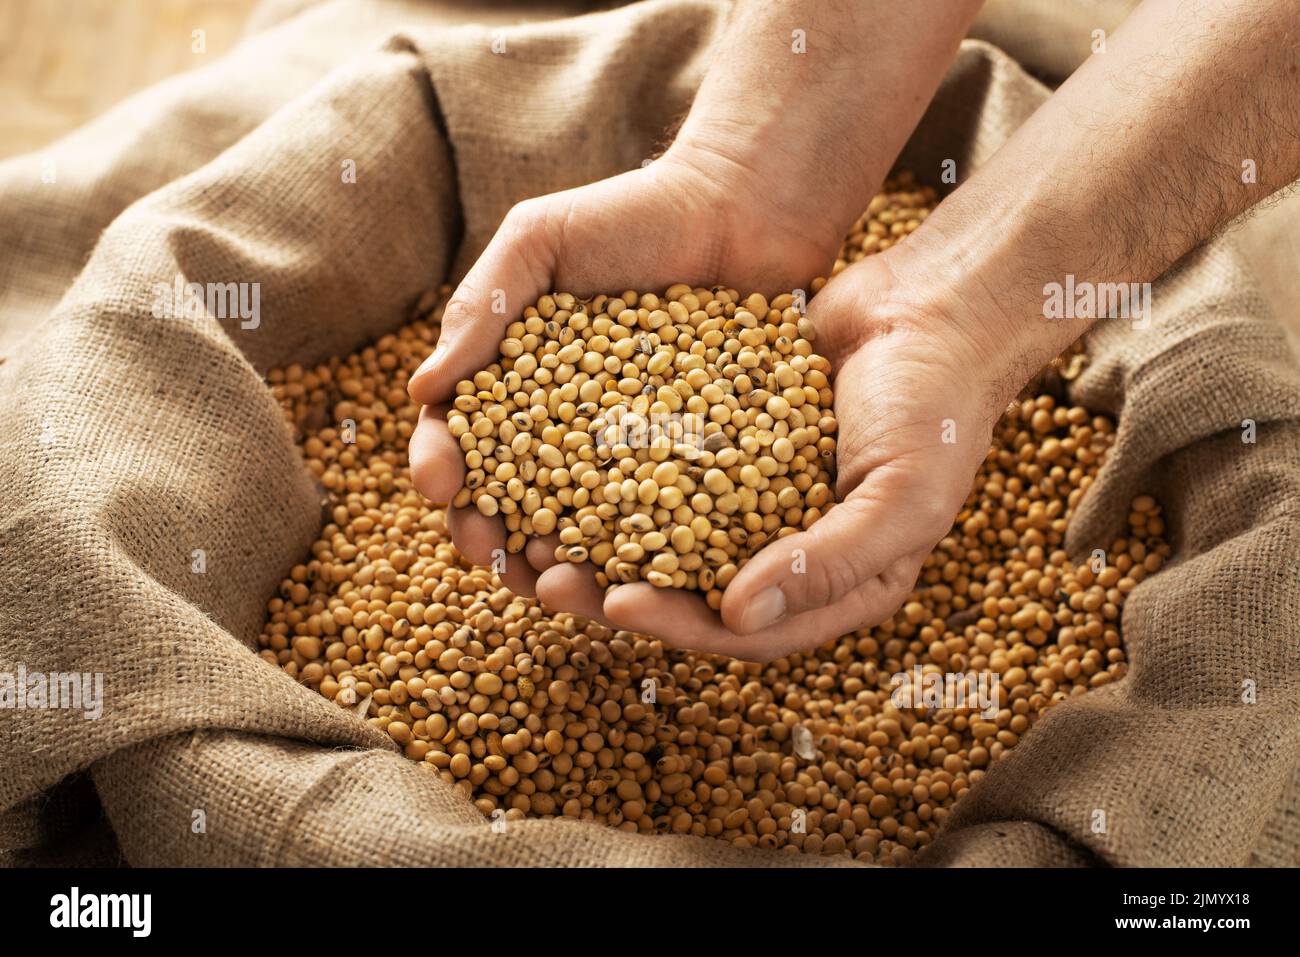 Caucasian male showing soybeans in his hands over burlap sack Stock Photo